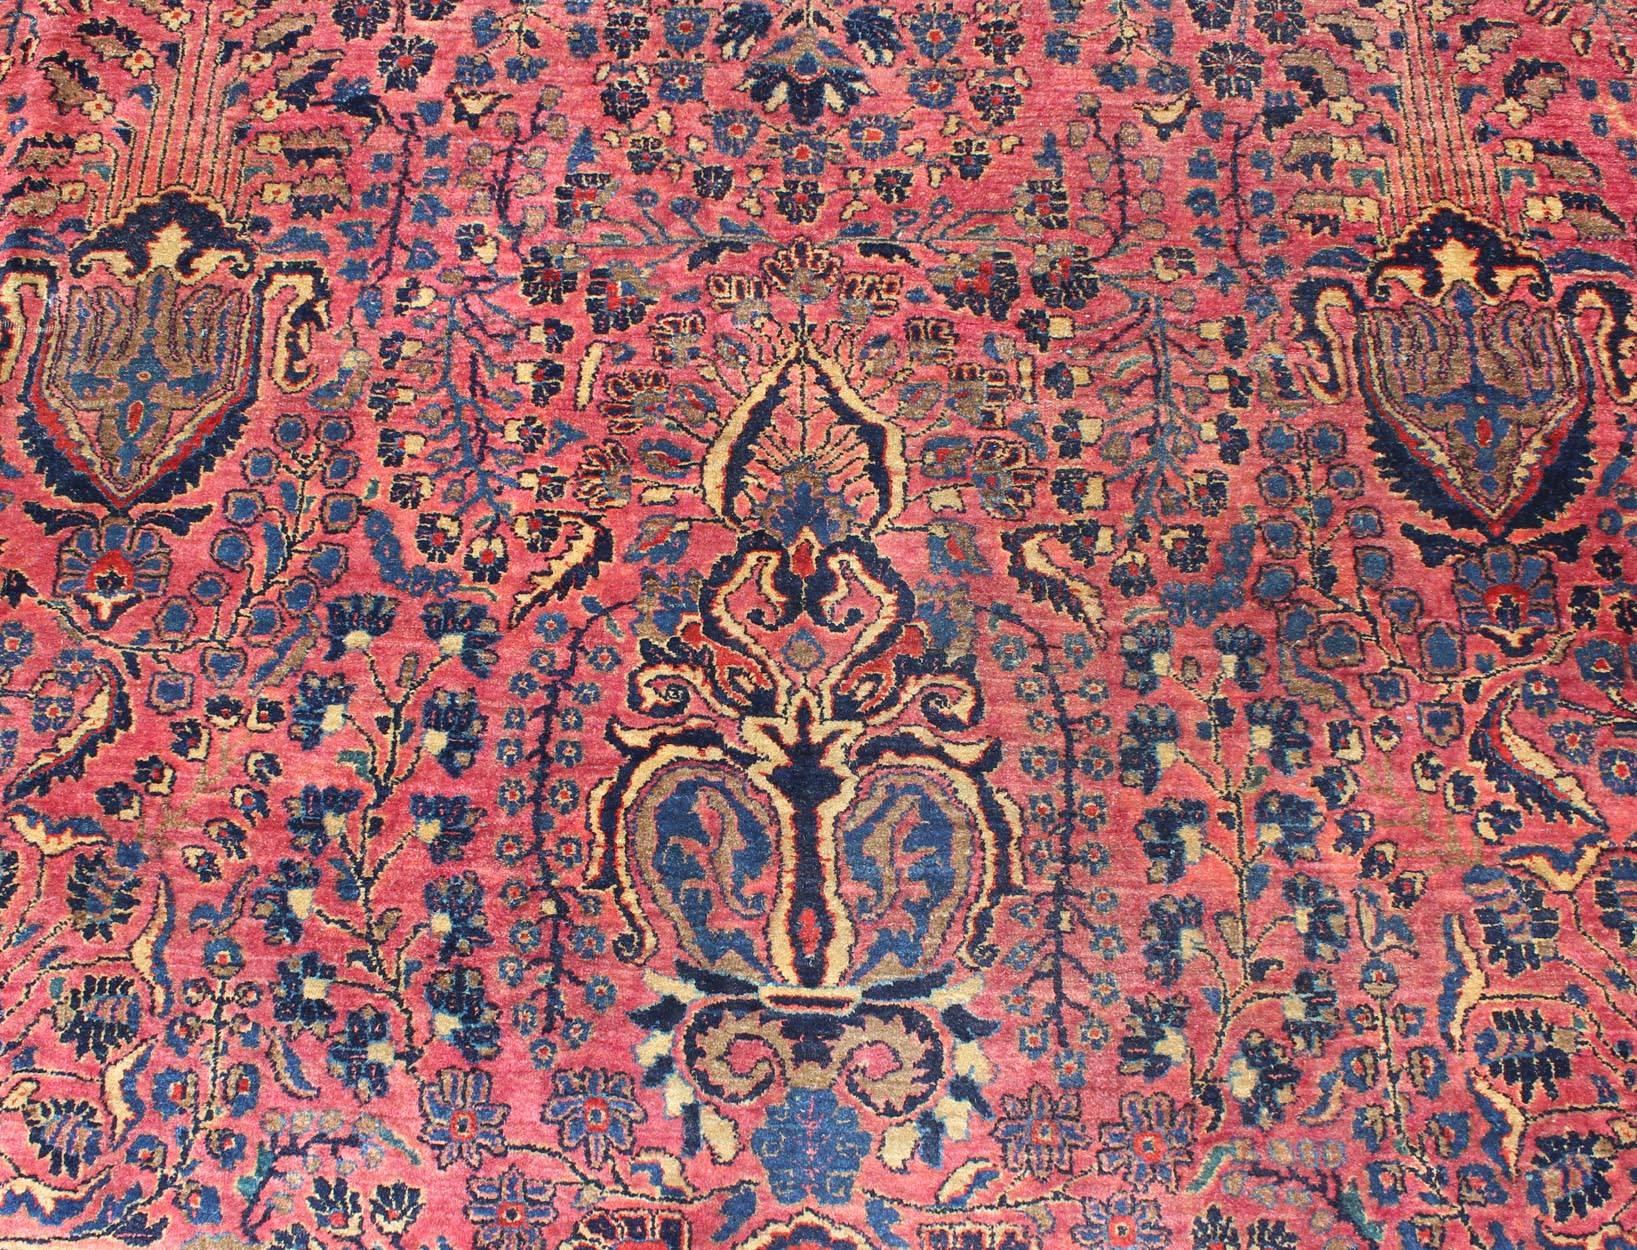 Antique Persian Sarouk Carpet with Deep Cranberry Field and Floral Elements 5